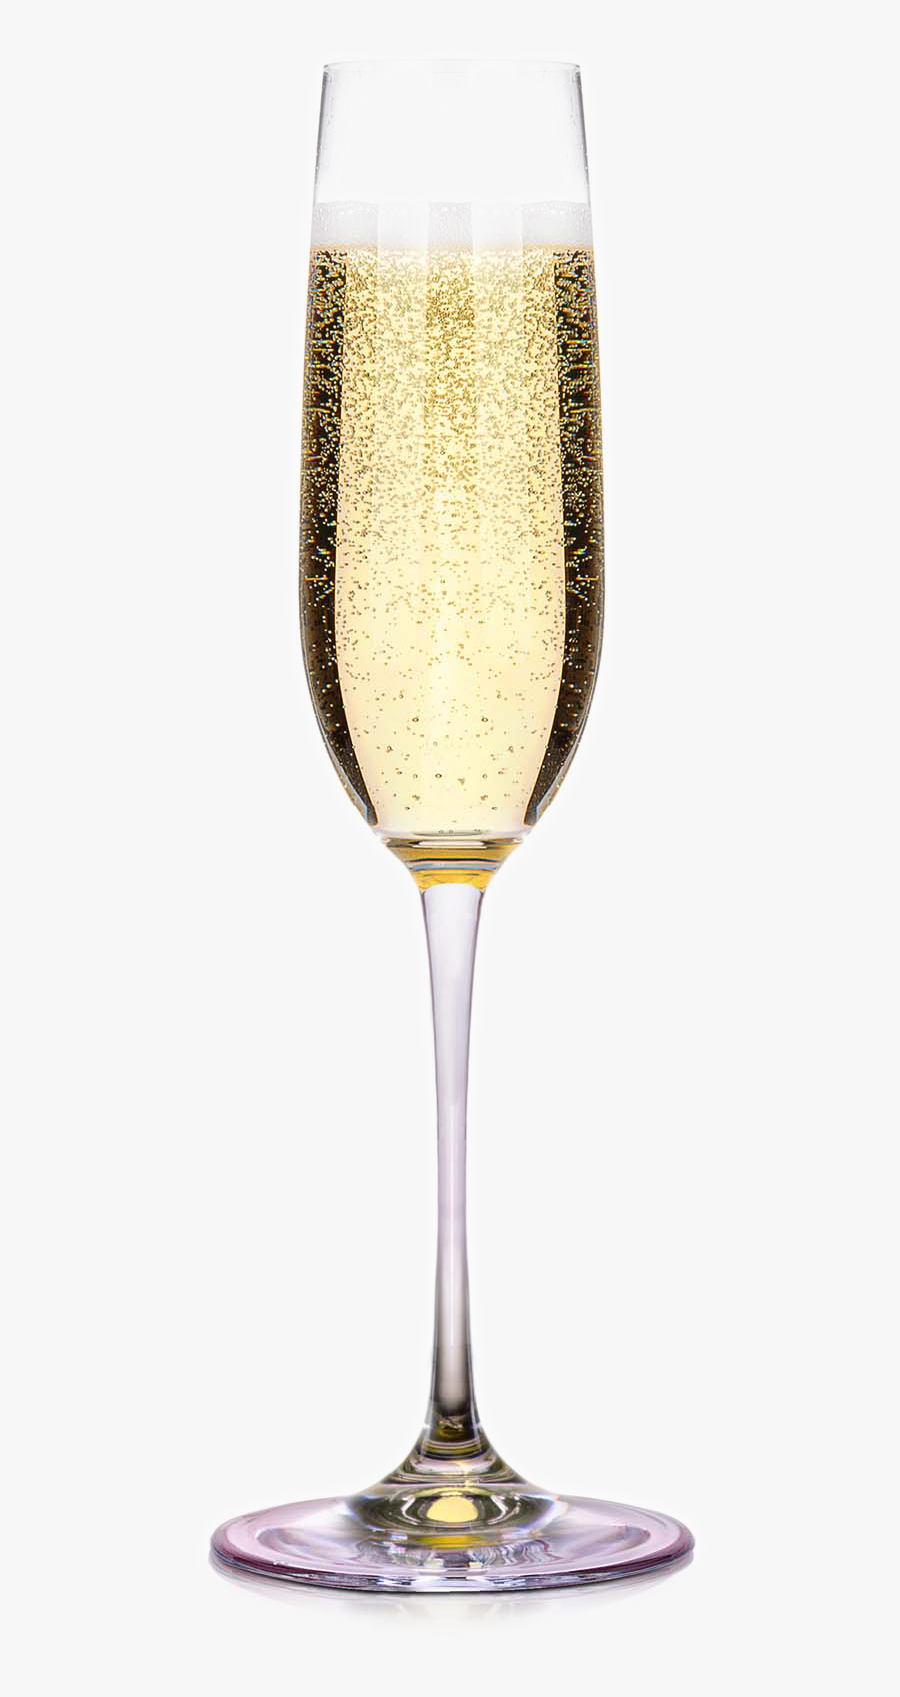 Champagne Glass Sparkling Wine Mimosa - Champagne Flute Glass Png, Transparent Clipart